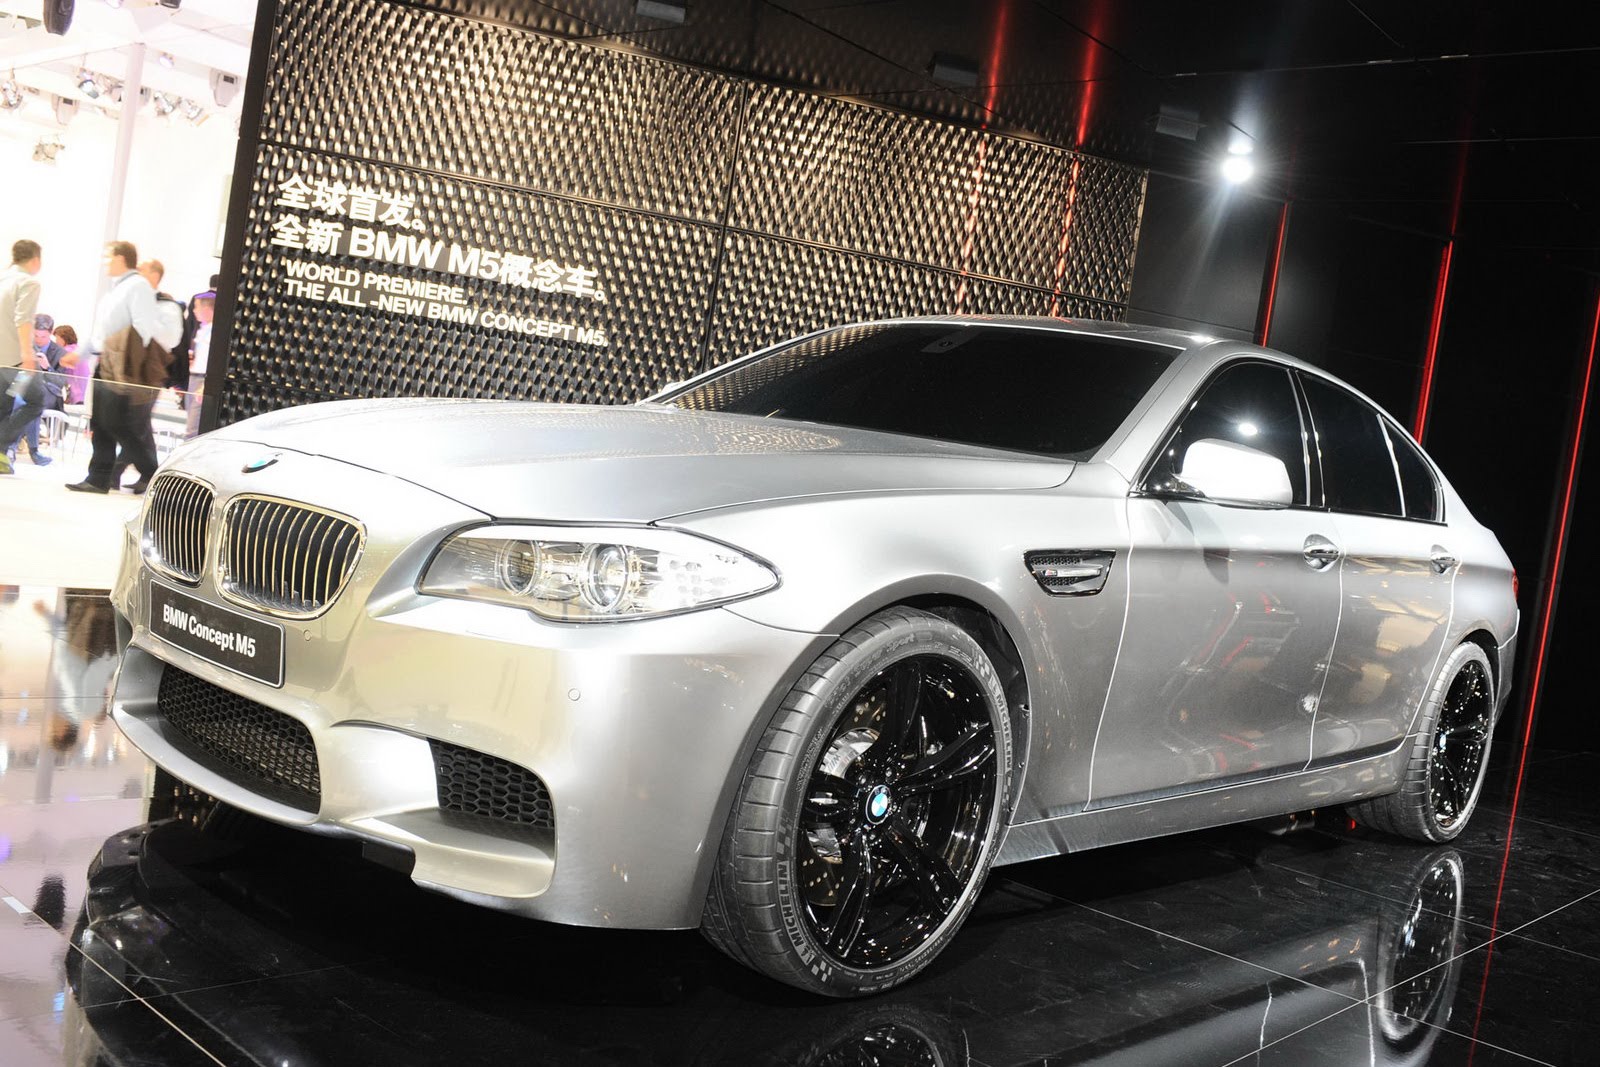 The Ultimate Driving Machine: The 2011 BMW M5 Concept